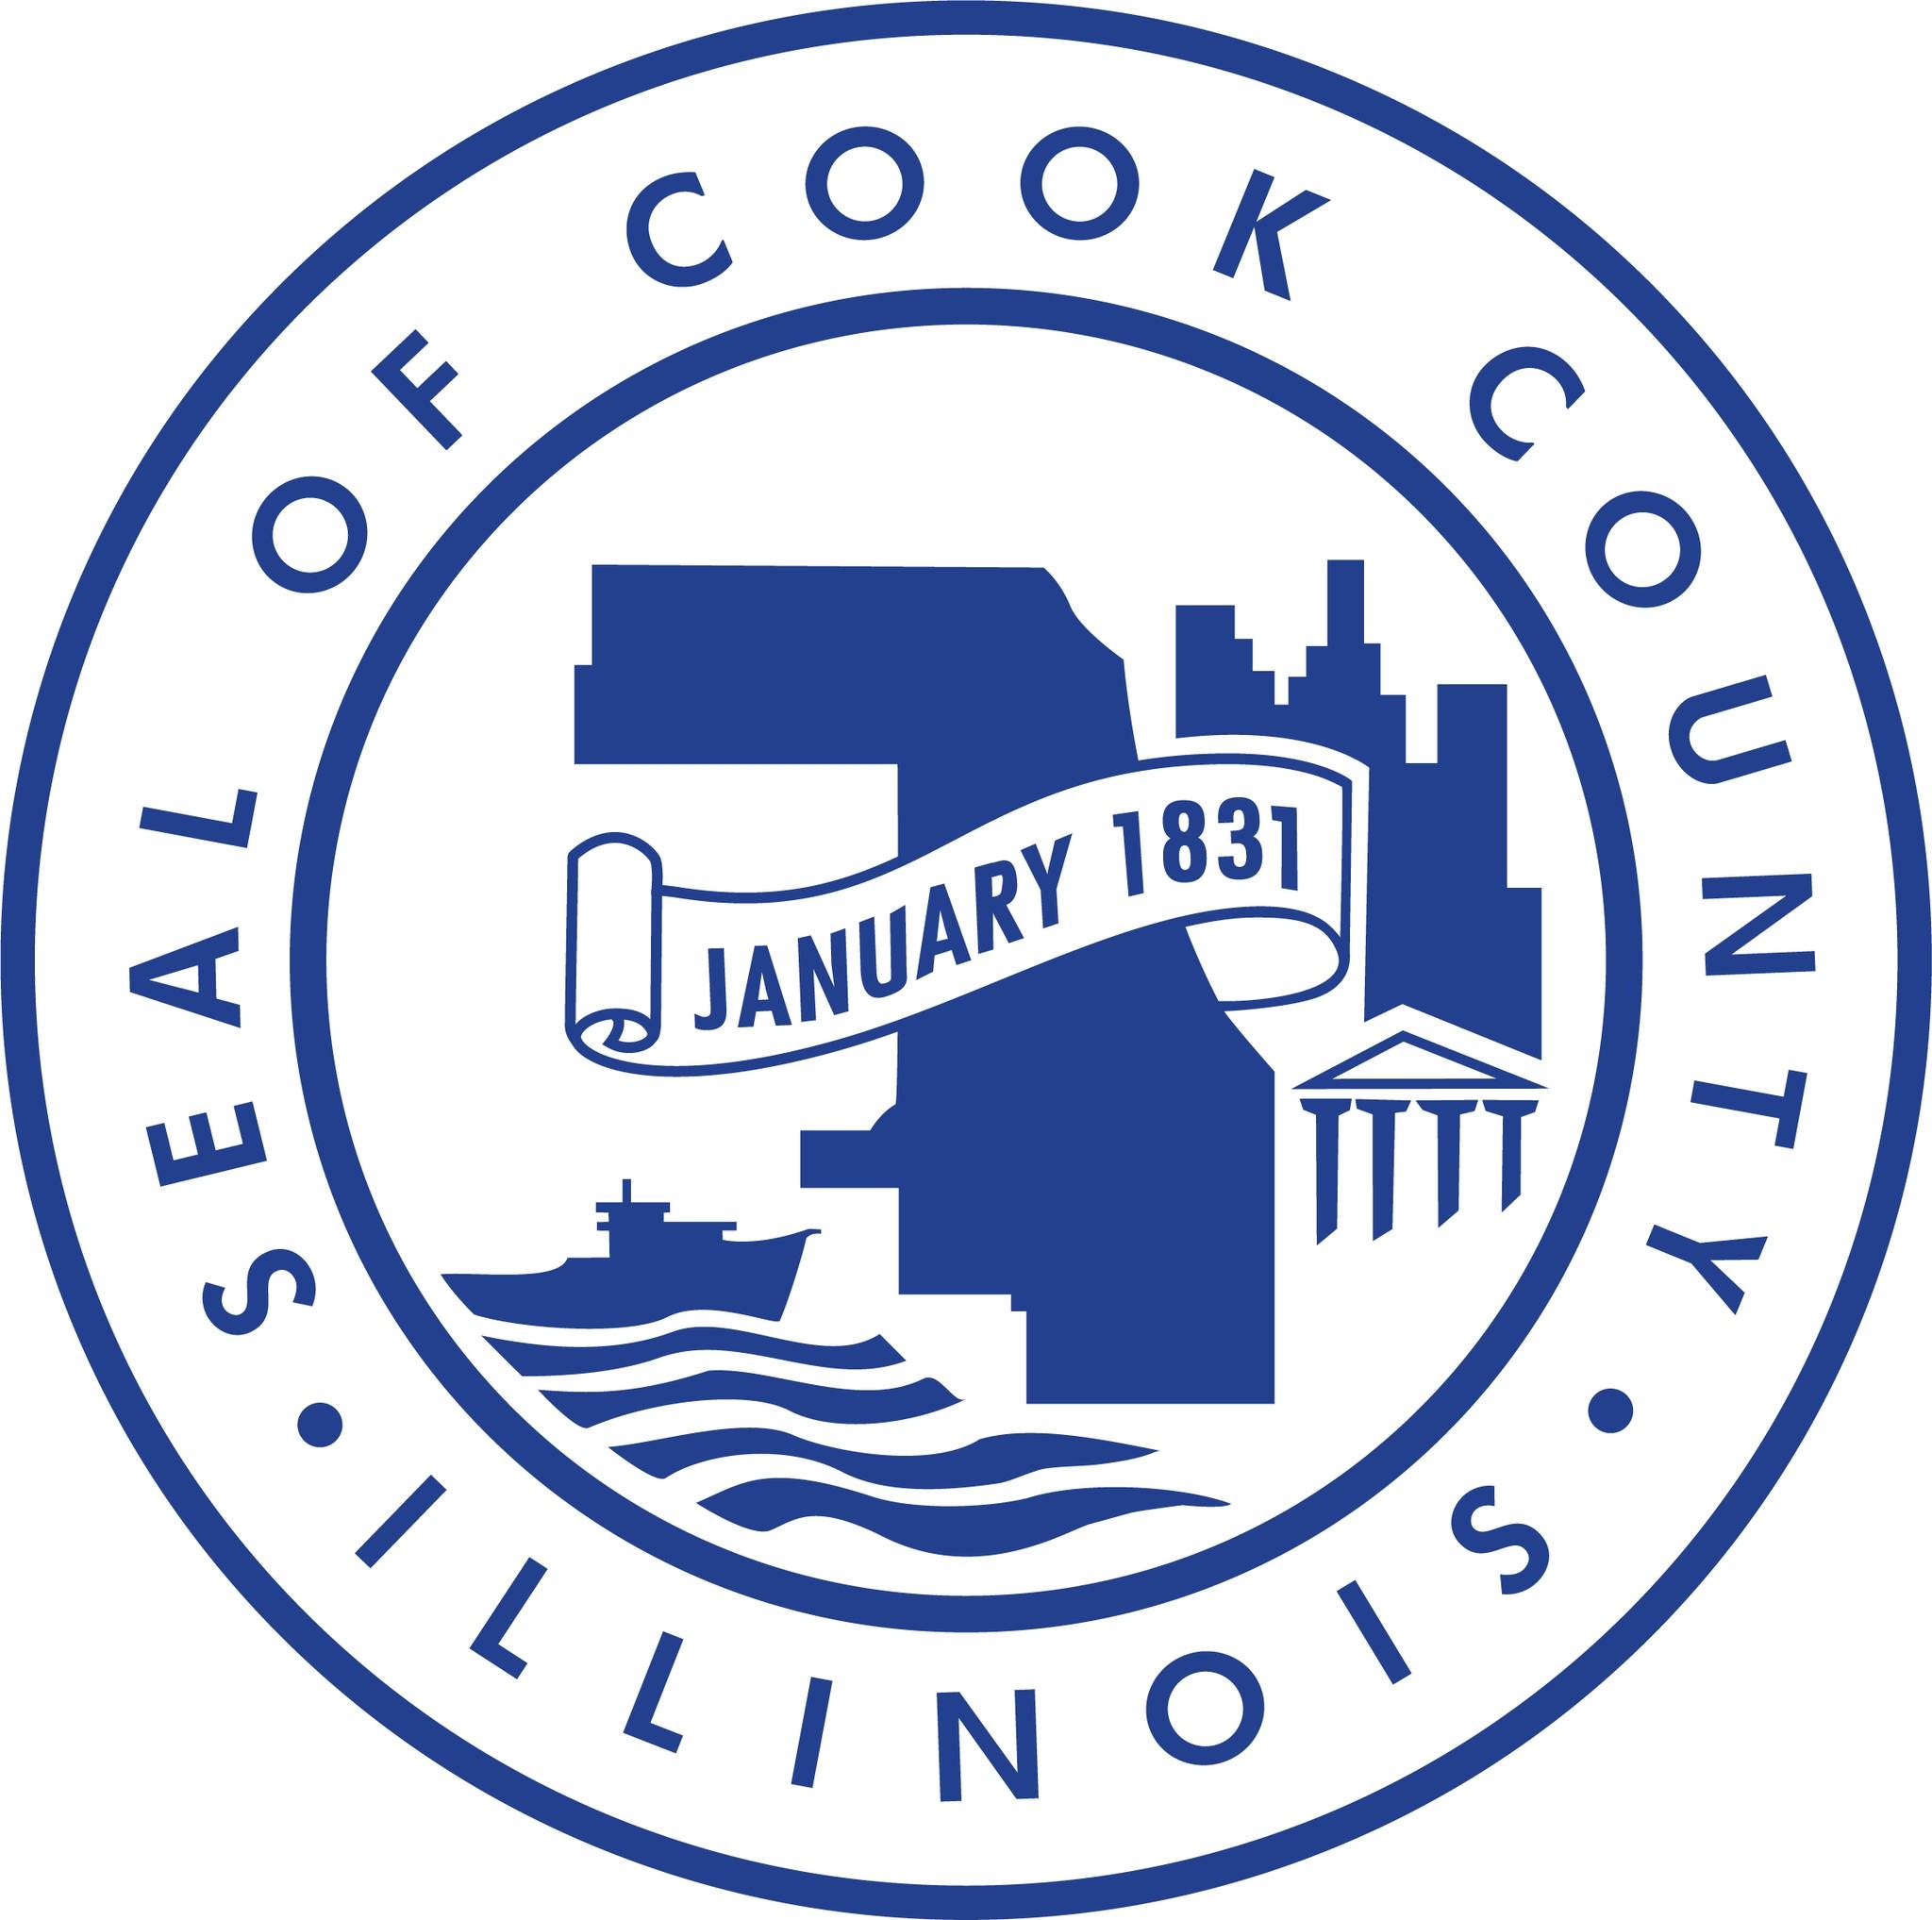 The Seal of Cook County, Illinois